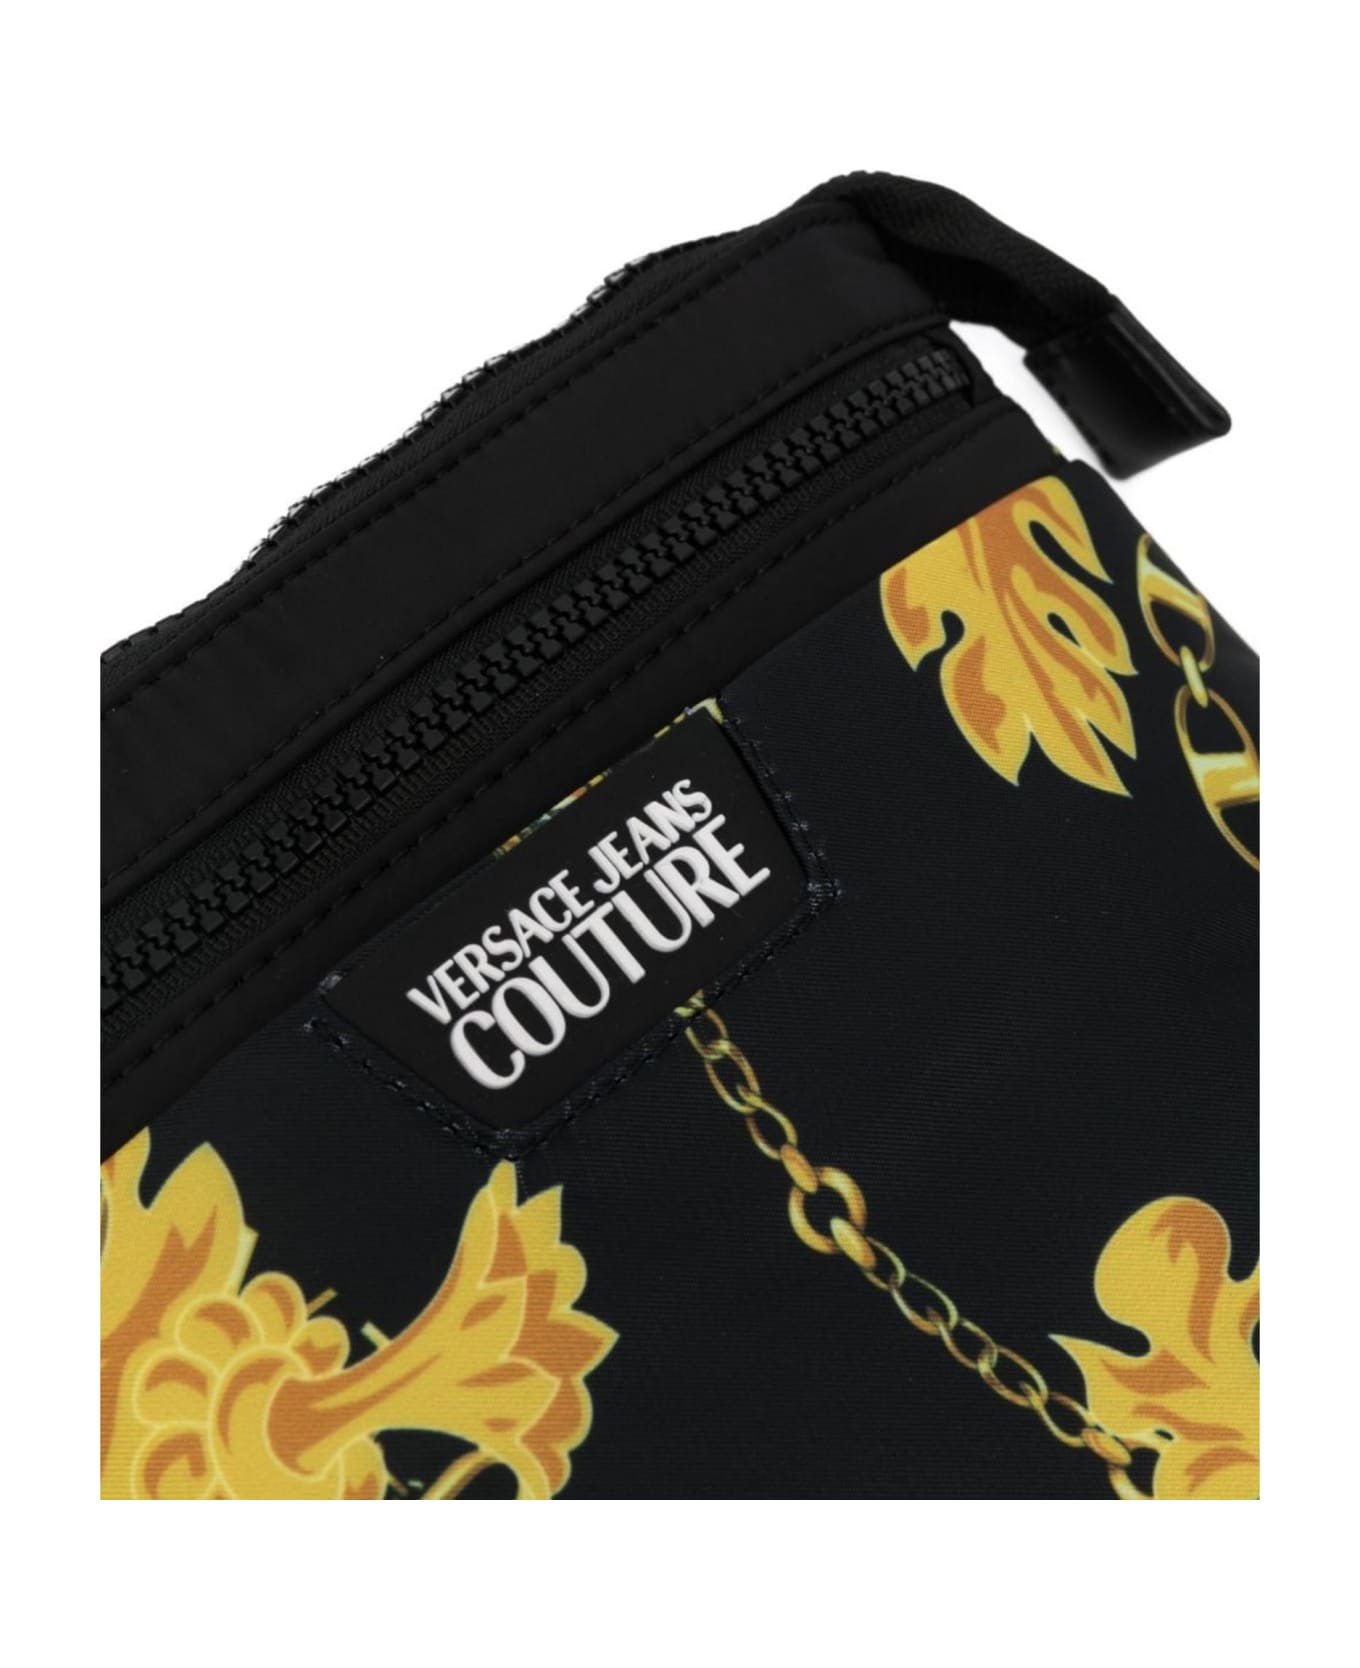 Versace Jeans Couture Bag - BLACK/GOLD バッグ